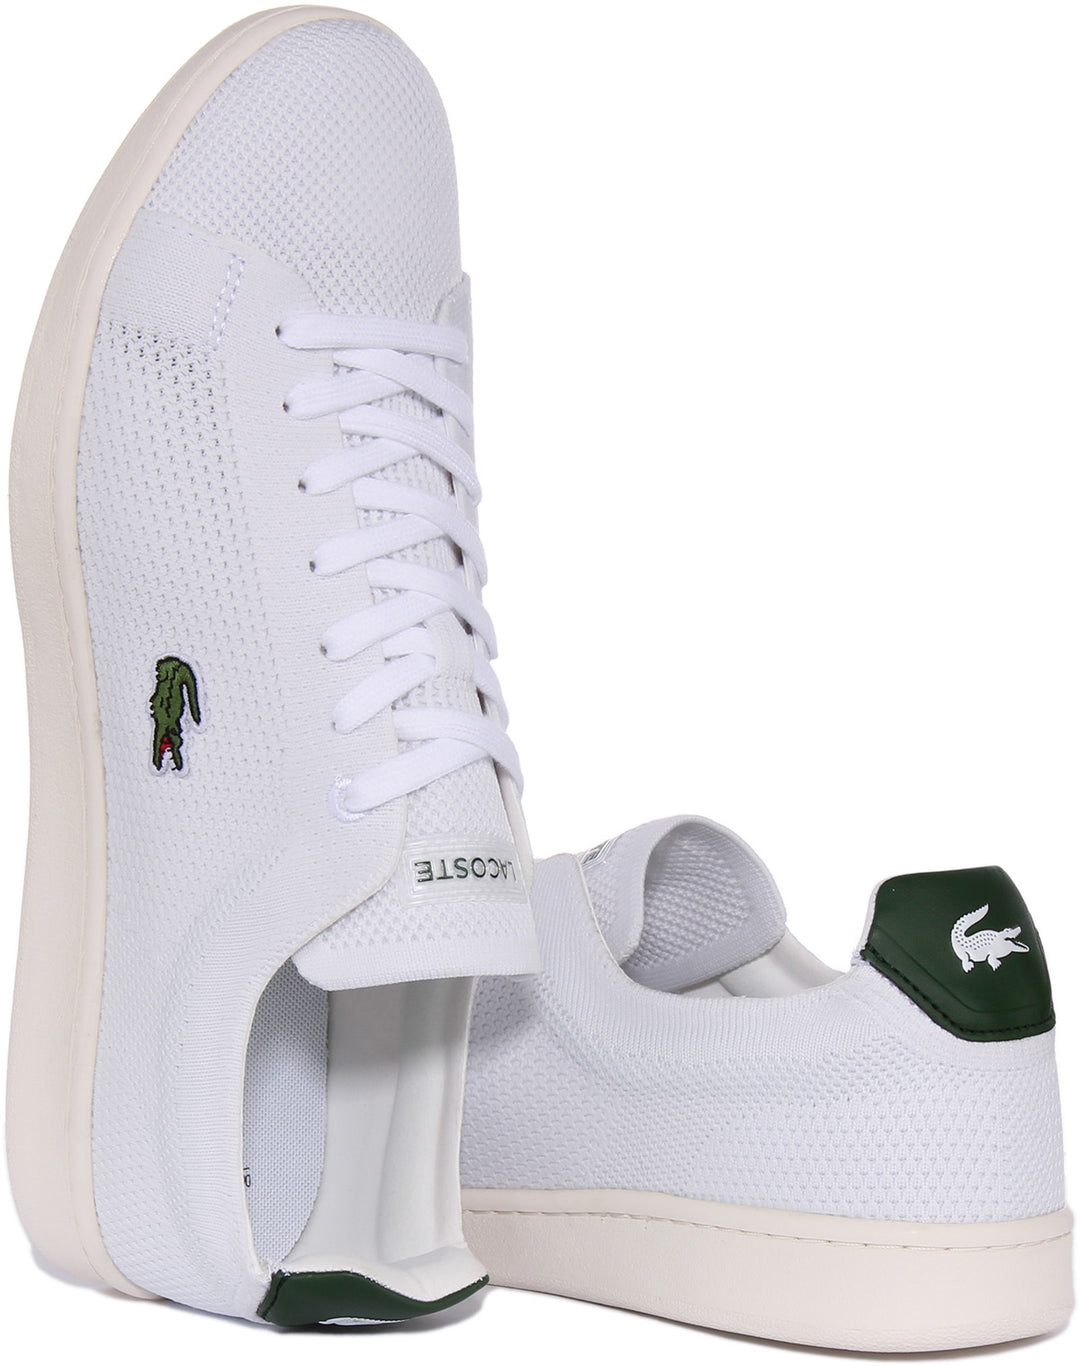 Lacoste Carnaby Piquee In White Green For Men